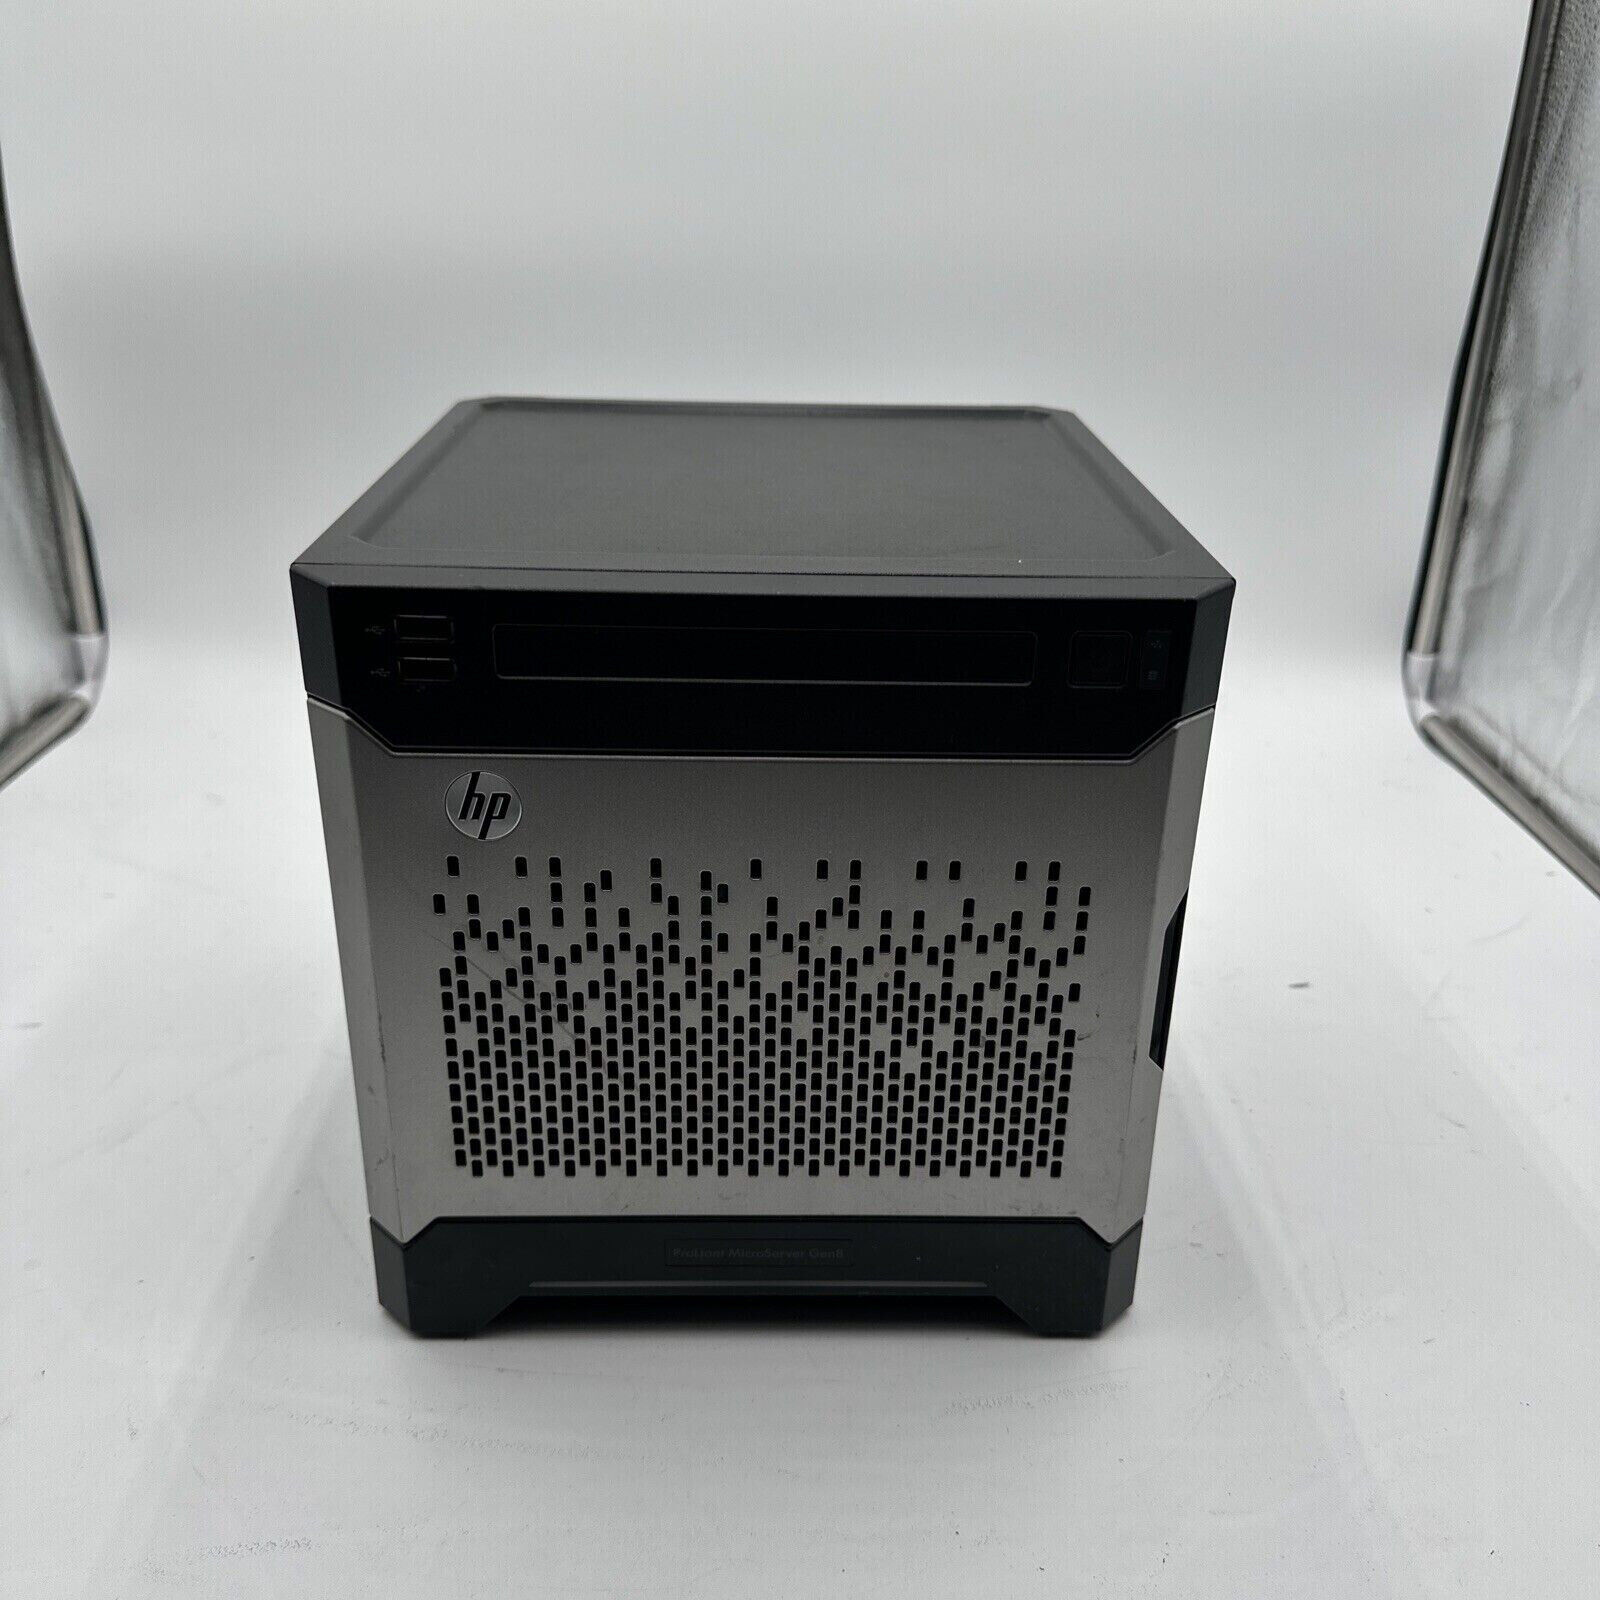 HP Proliant MicroServer Gen 8 2.3GHz CPU 16GB RAM NO DRIVES/CADDIES INCLUDED